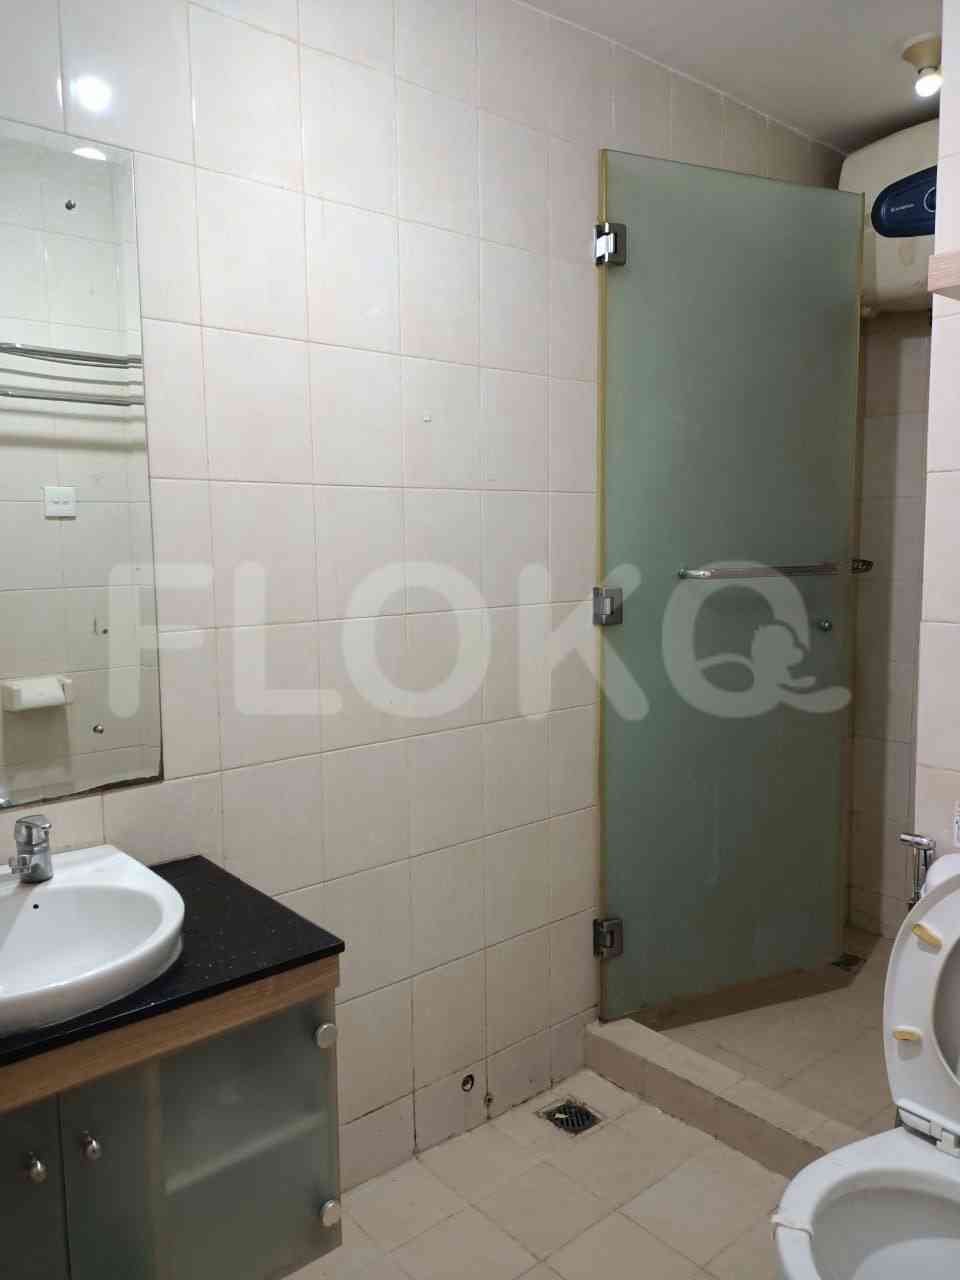 2 Bedroom on 7th Floor for Rent in Sudirman Park Apartment - ftad1f 8